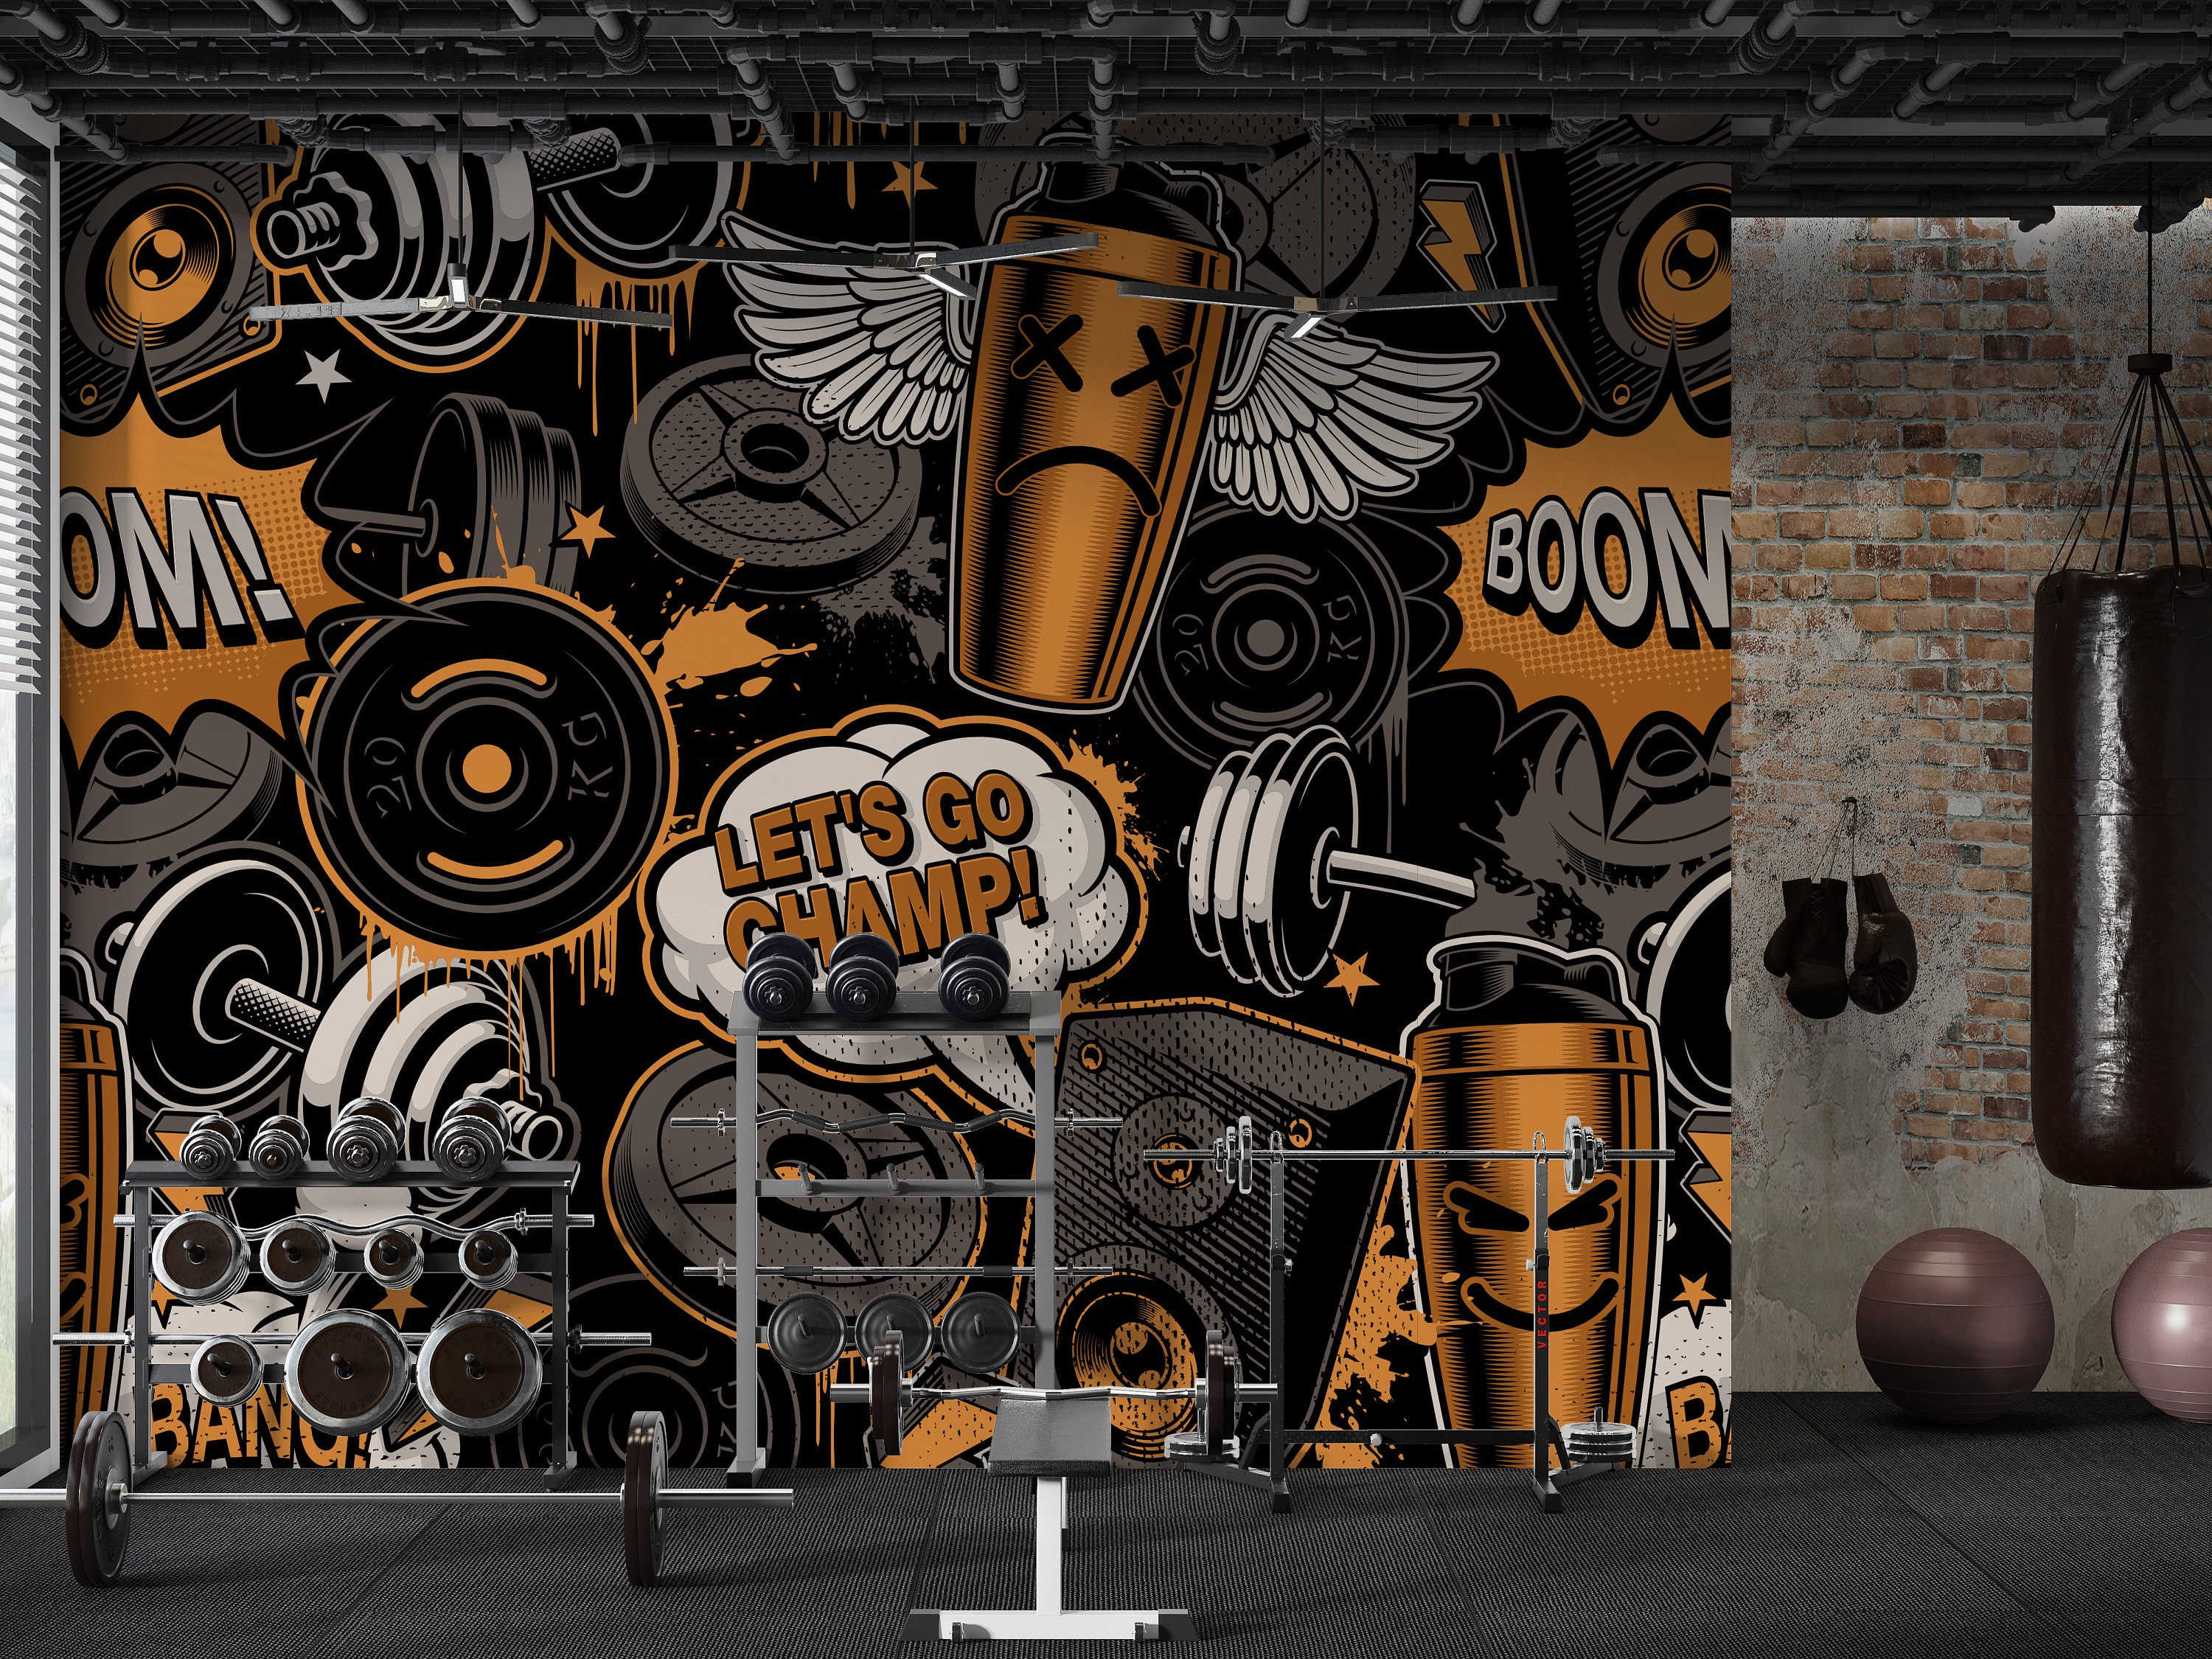 Top more than 164 wallpaper for gym wall latest - 3tdesign.edu.vn